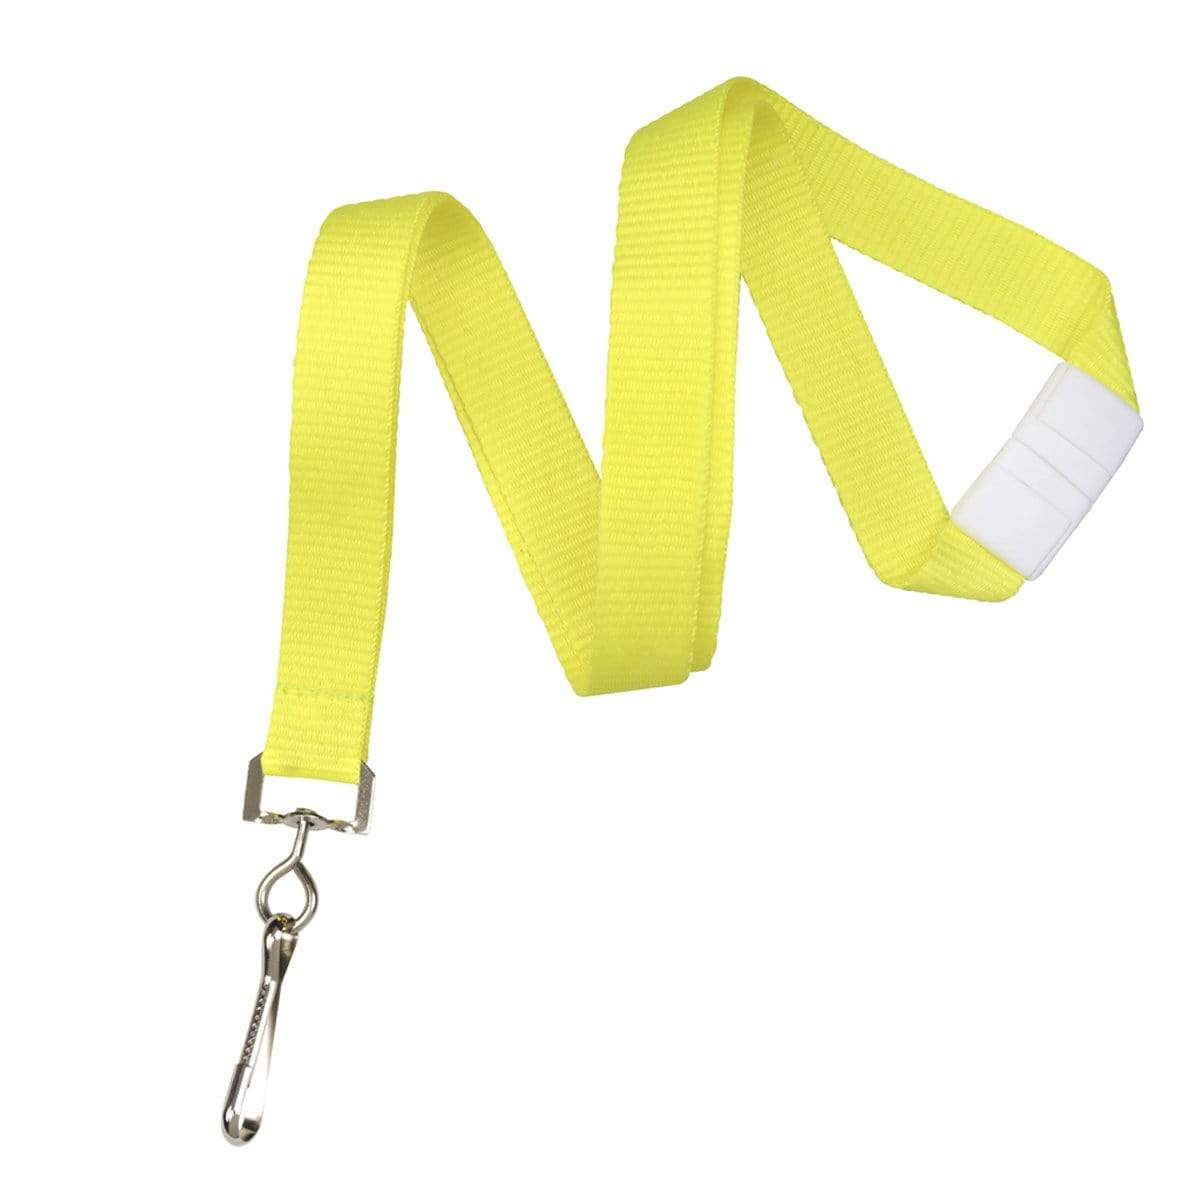 Neon Yellow Neon Lanyard with Safety Breakaway Clasp - Bright Soft Lanyards 2138-504X 2138-5048